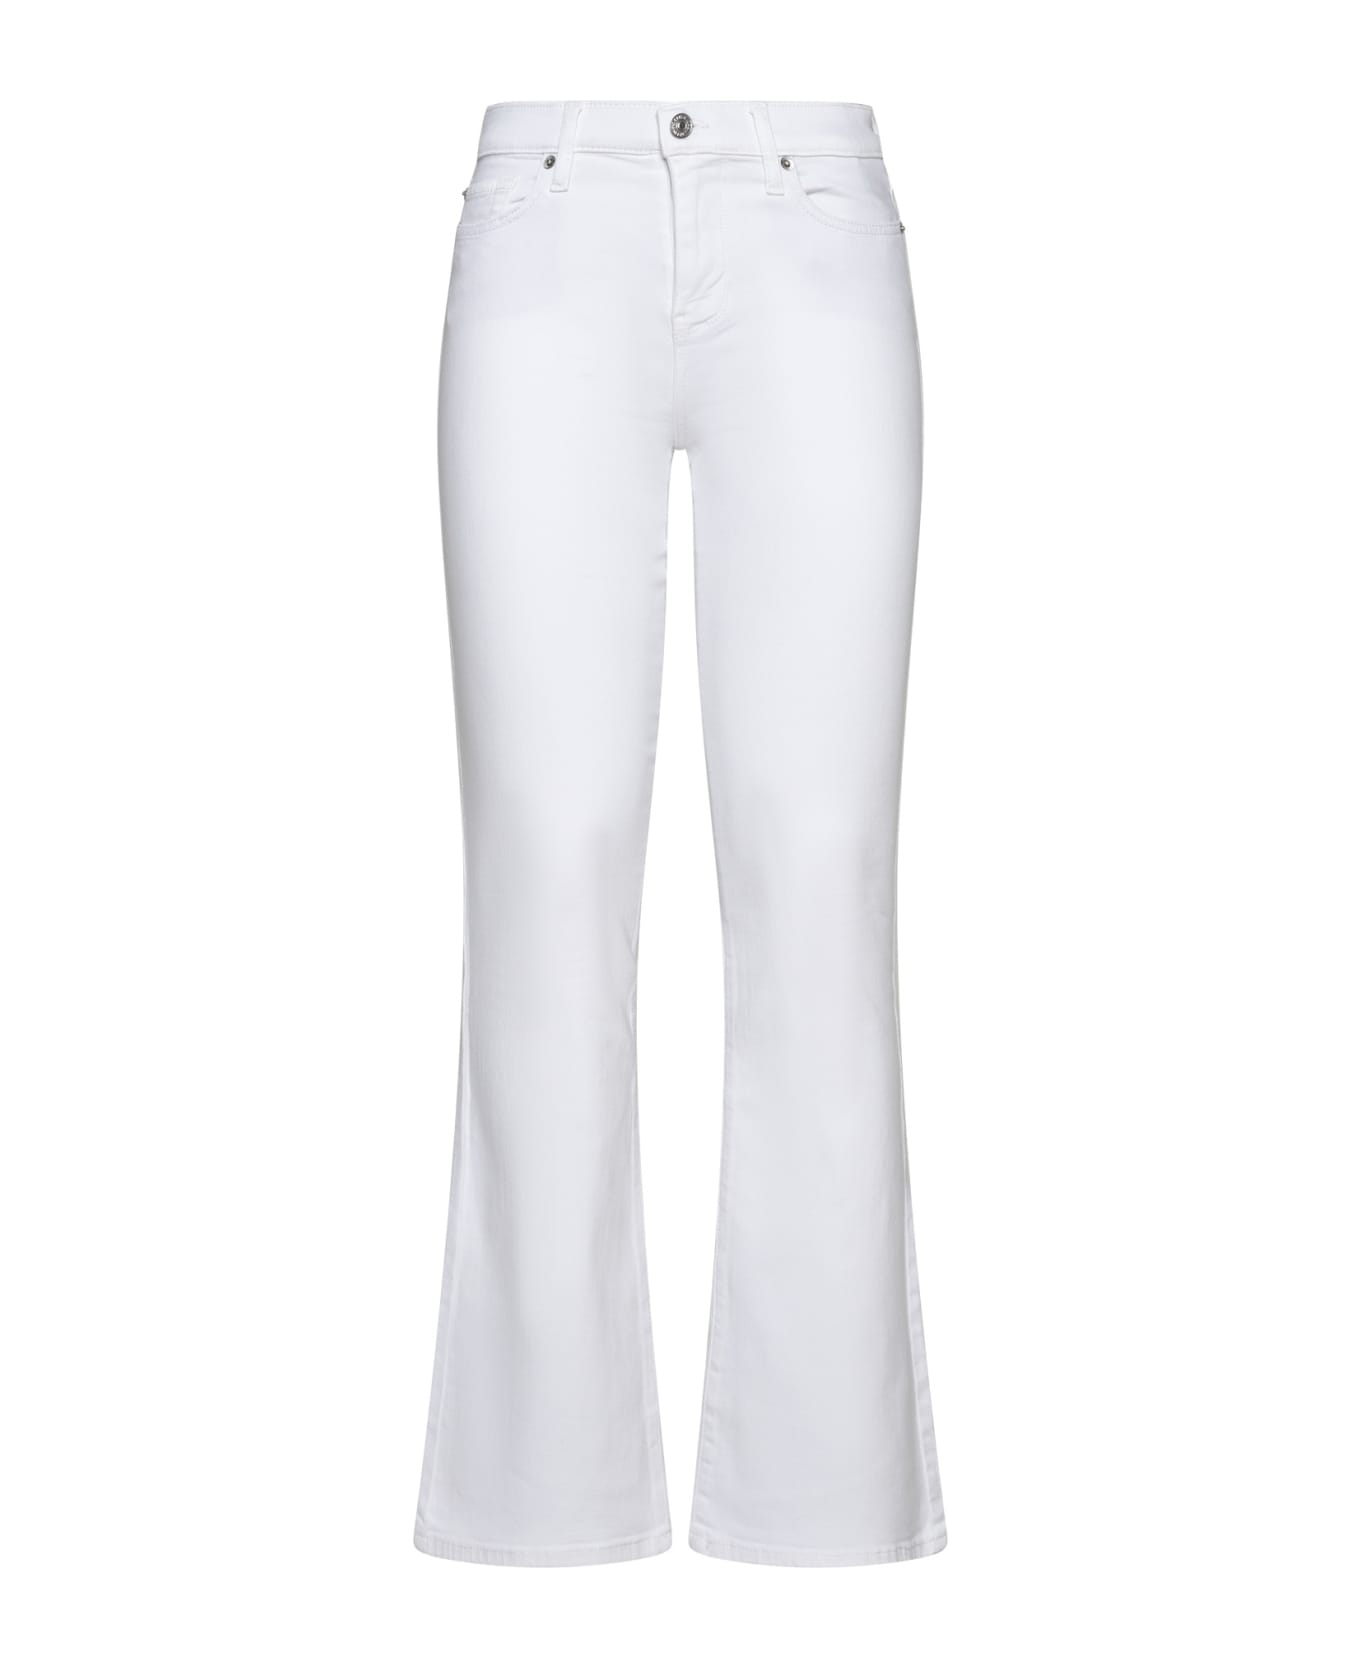 7 For All Mankind Jeans - White ボトムス